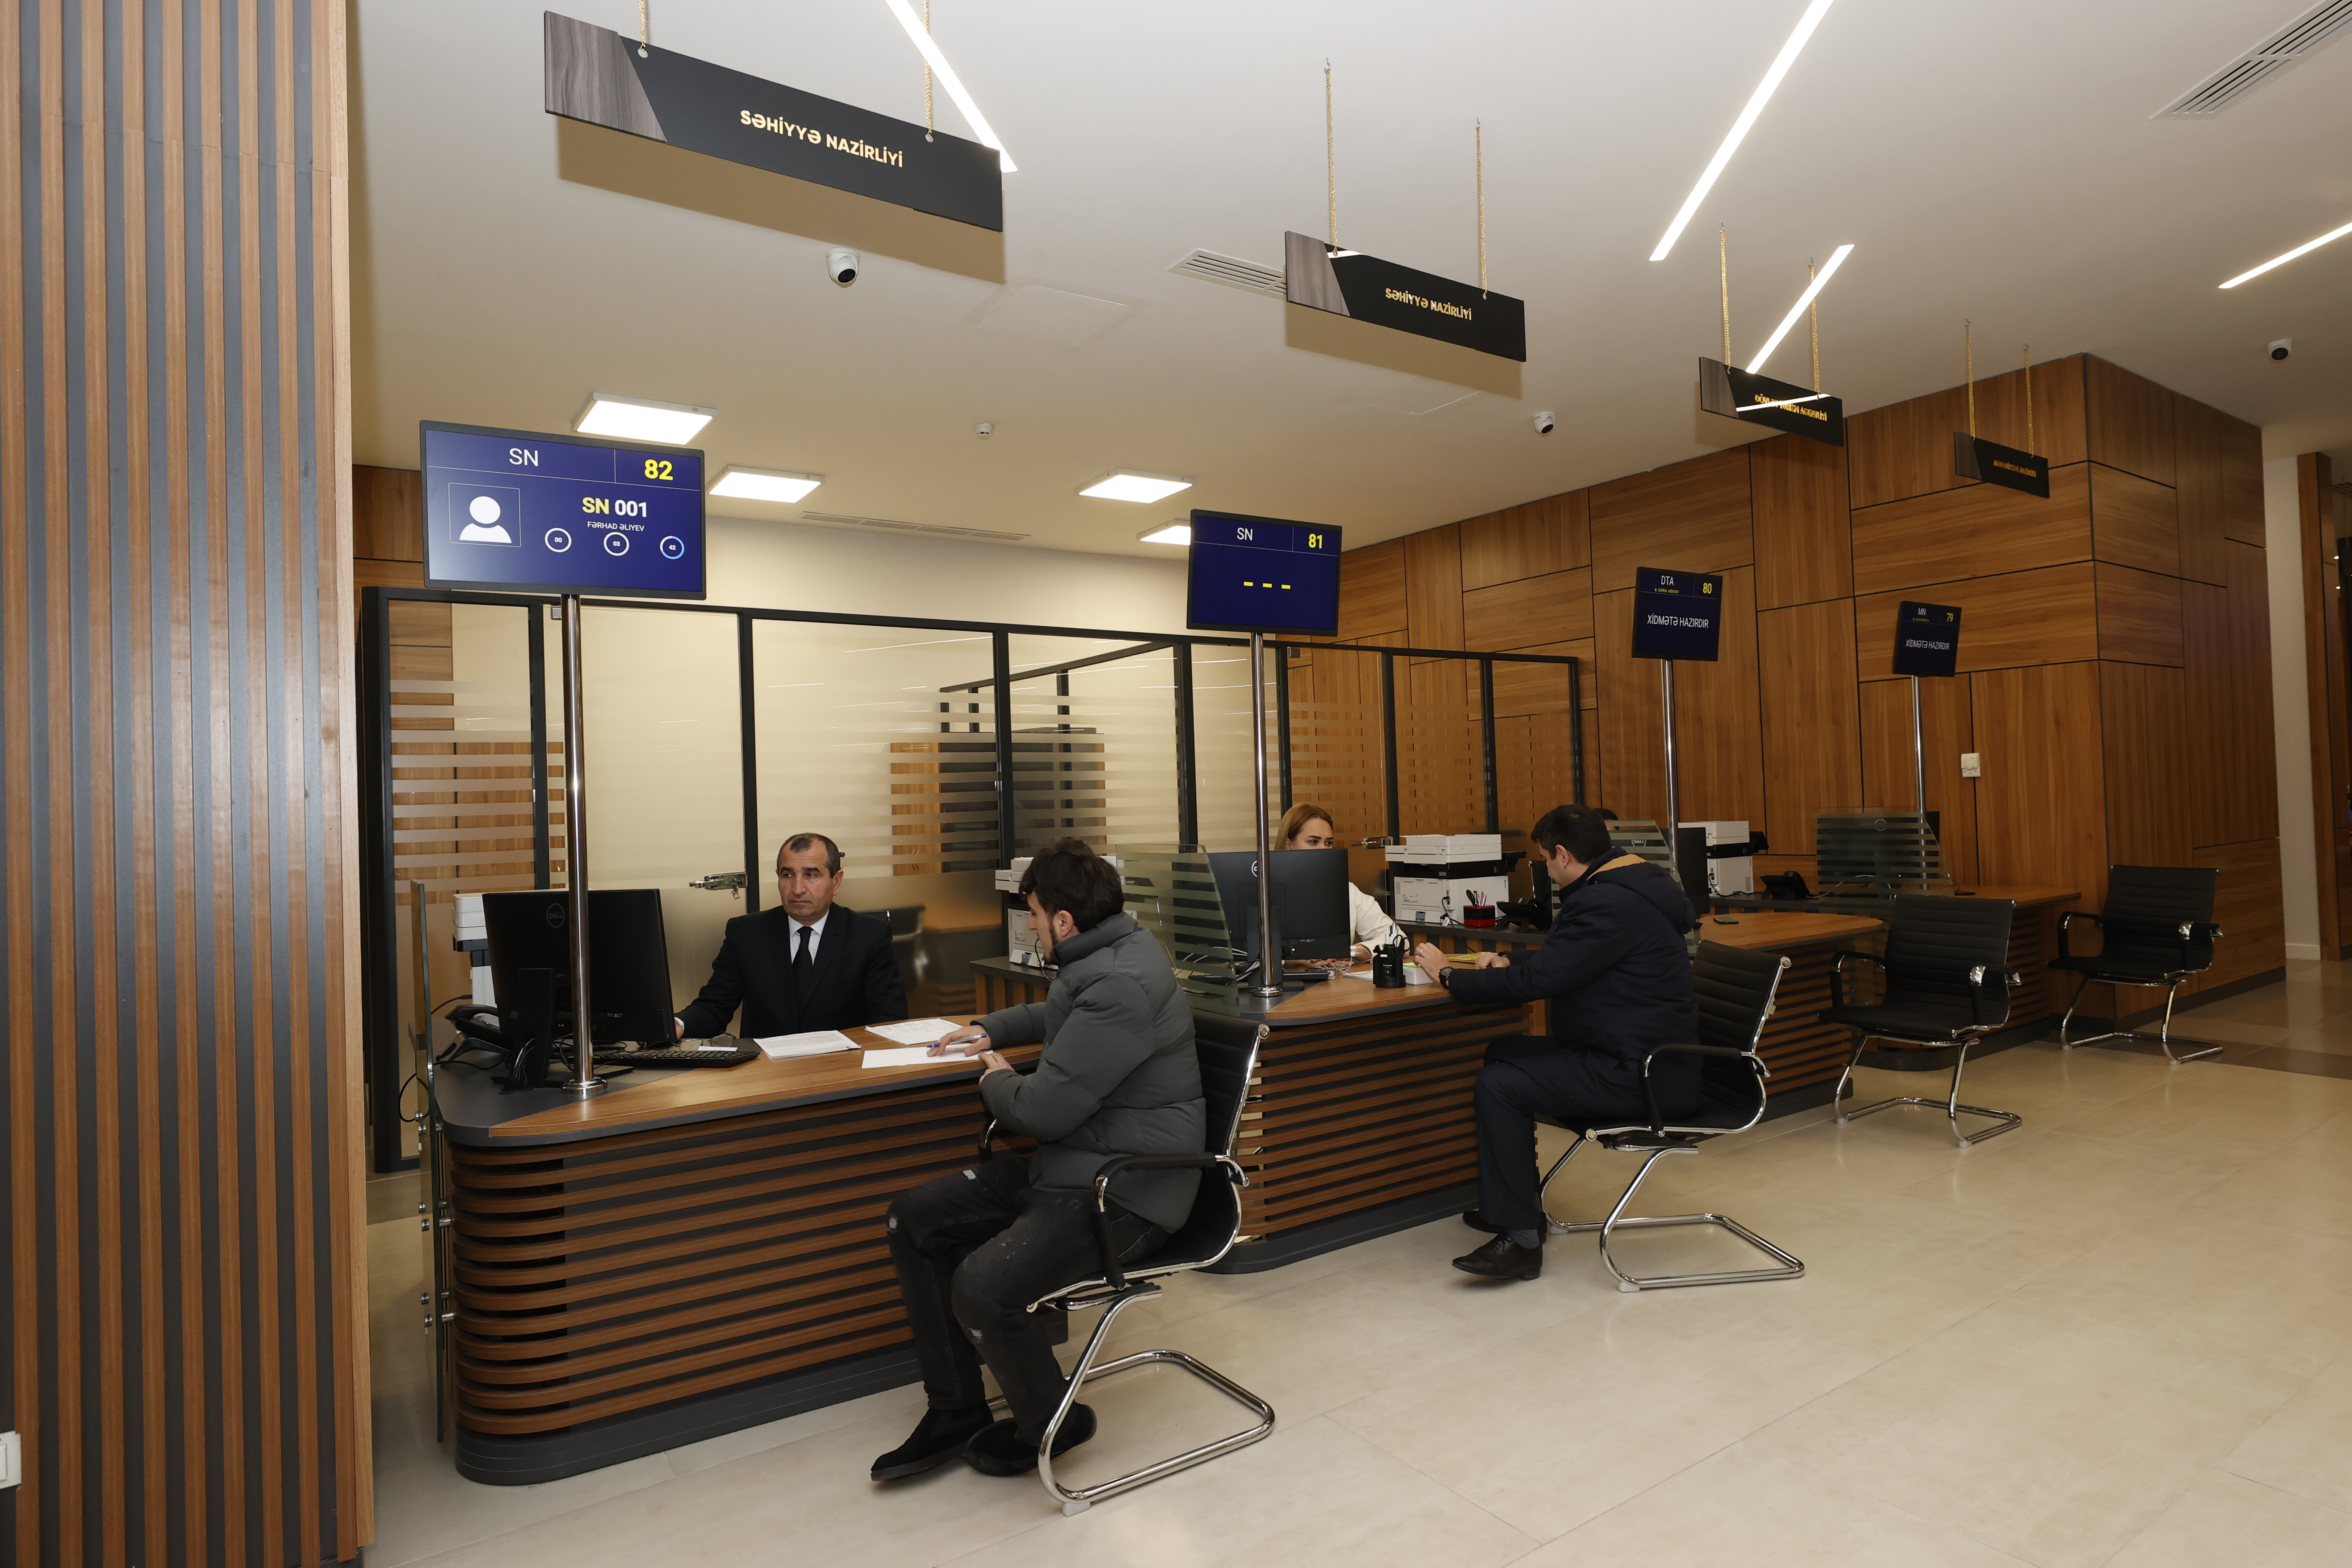 Service desk of the Ministry of Health operates in "Baku SMB House" 